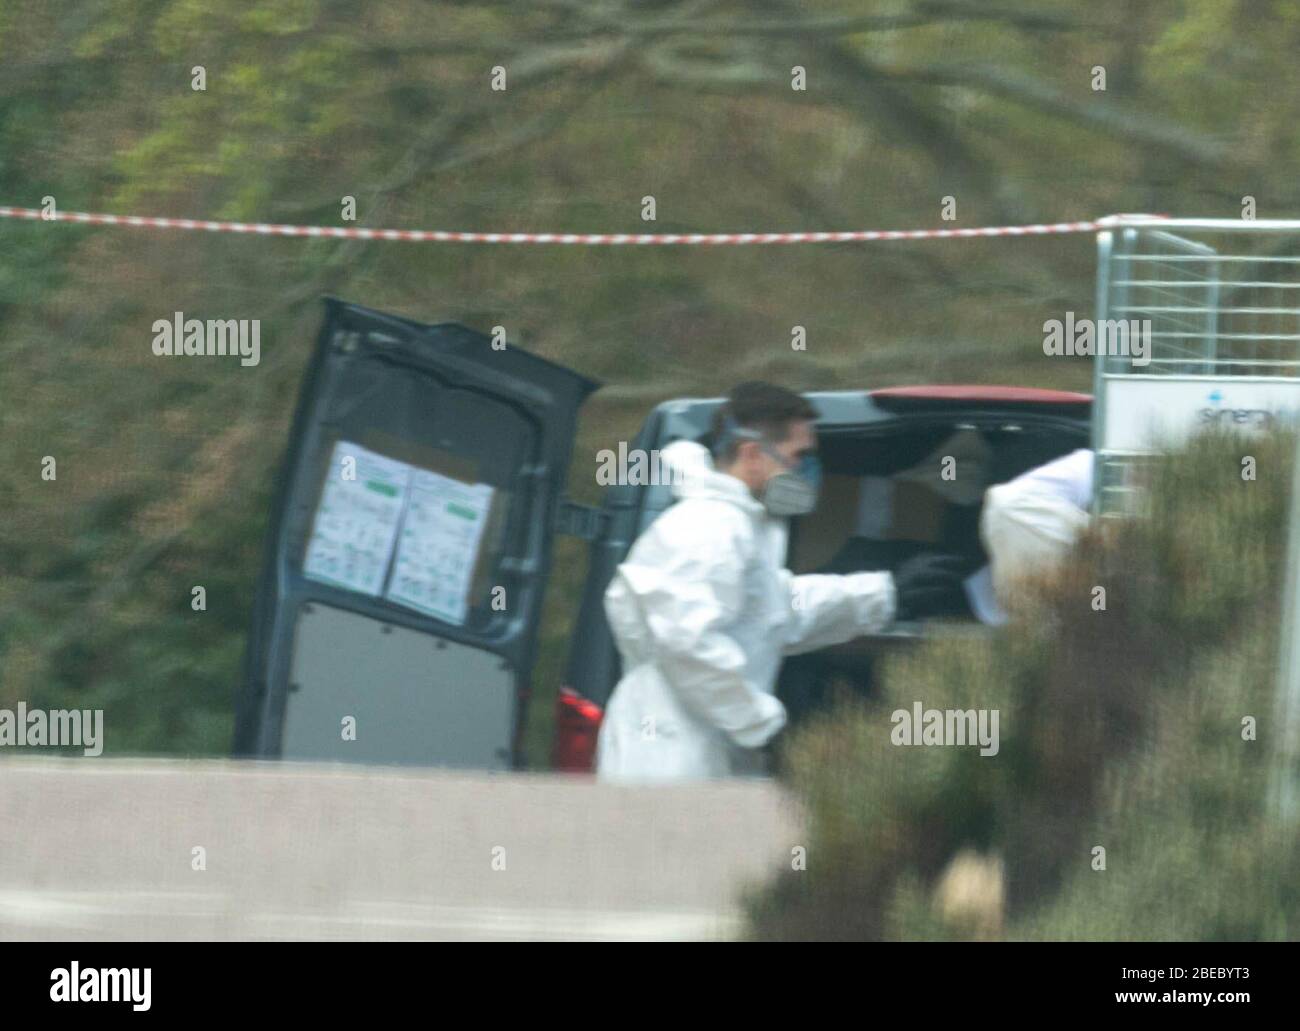 Brentwood Essex, UK. 13th Apr, 2020. Two undertakers remove their covid-19 Personal protective equipment at Brentwood Community hospital. Credit: Ian Davidson/Alamy Live News Stock Photo